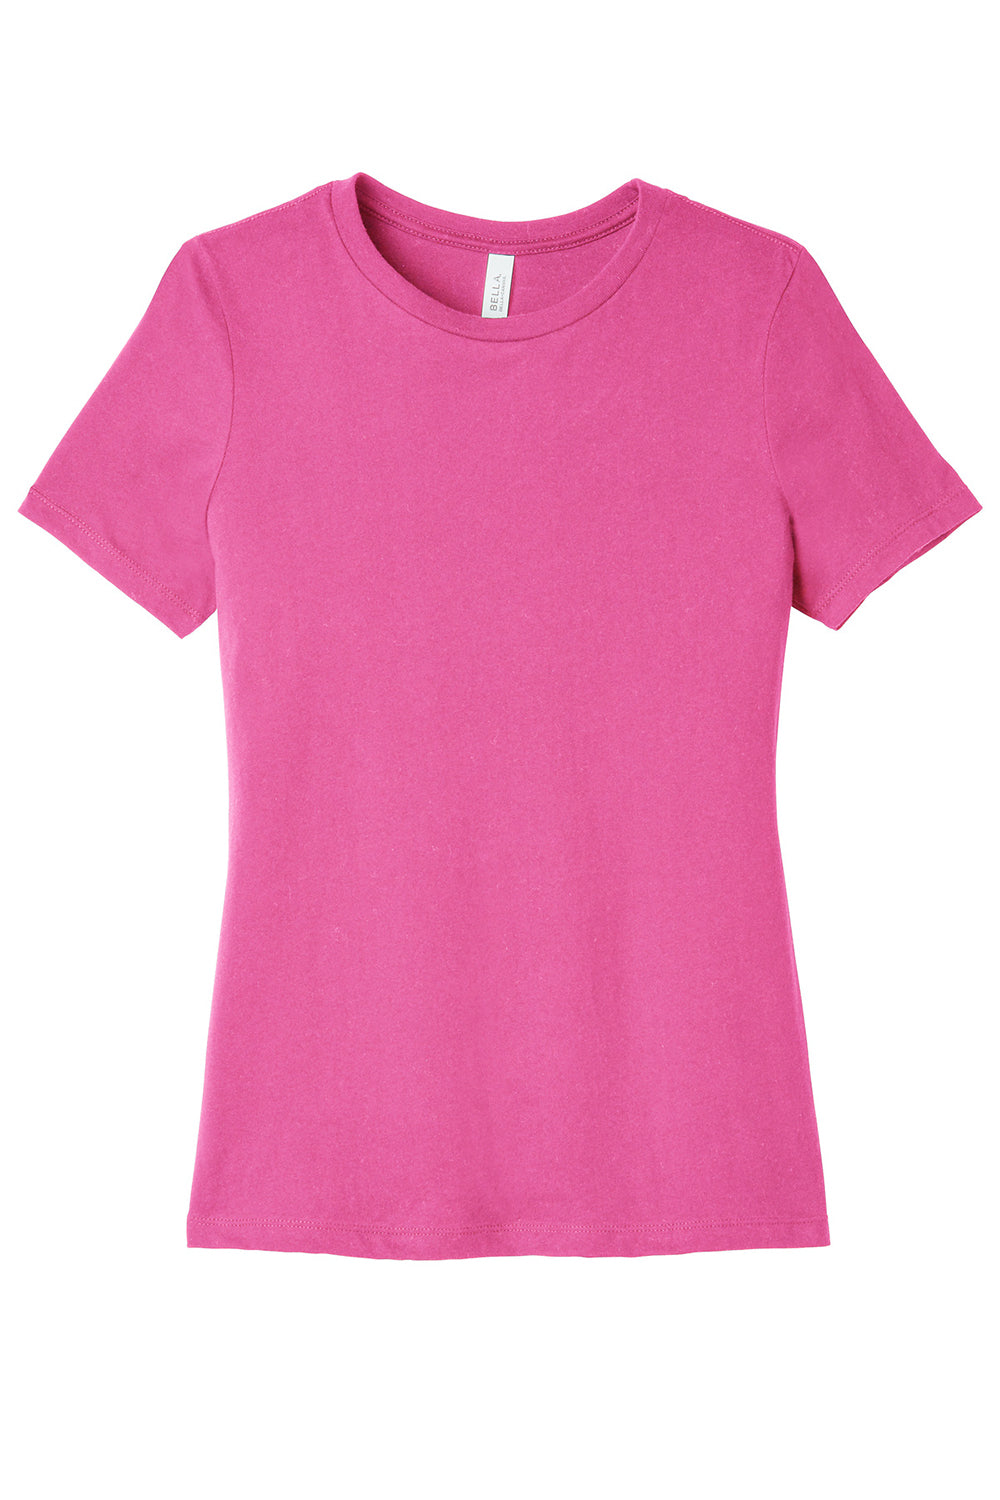 Bella + Canvas BC6400/B6400/6400 Womens Relaxed Jersey Short Sleeve Crewneck T-Shirt Charity Pink Flat Front